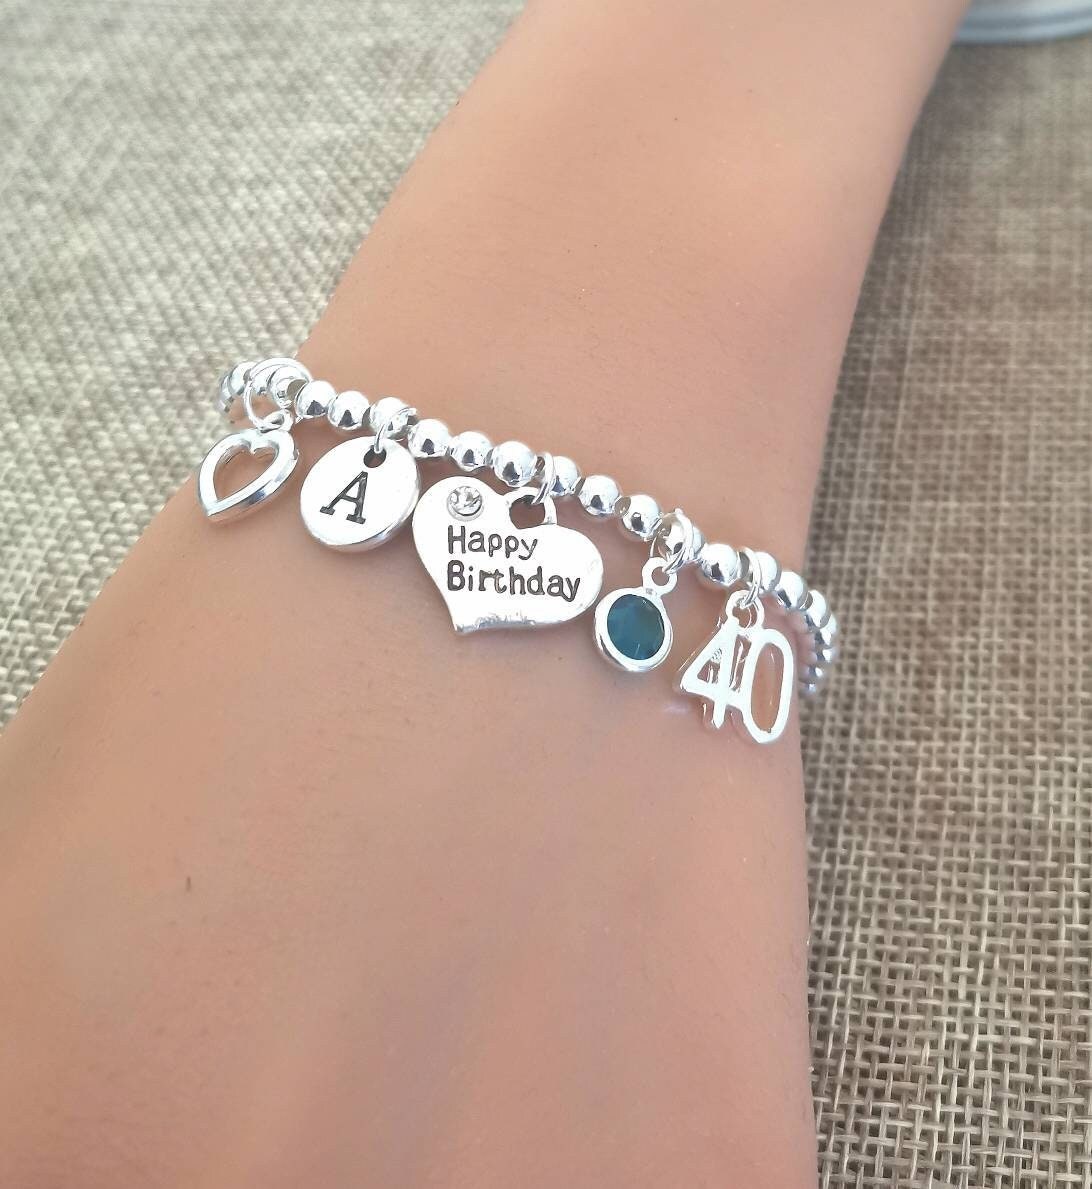 40th birthday gift for her, 40th birthday bracelet, 40th birthday bracelet, 40th birthday gifts for friend, best friend,sister,sister in law